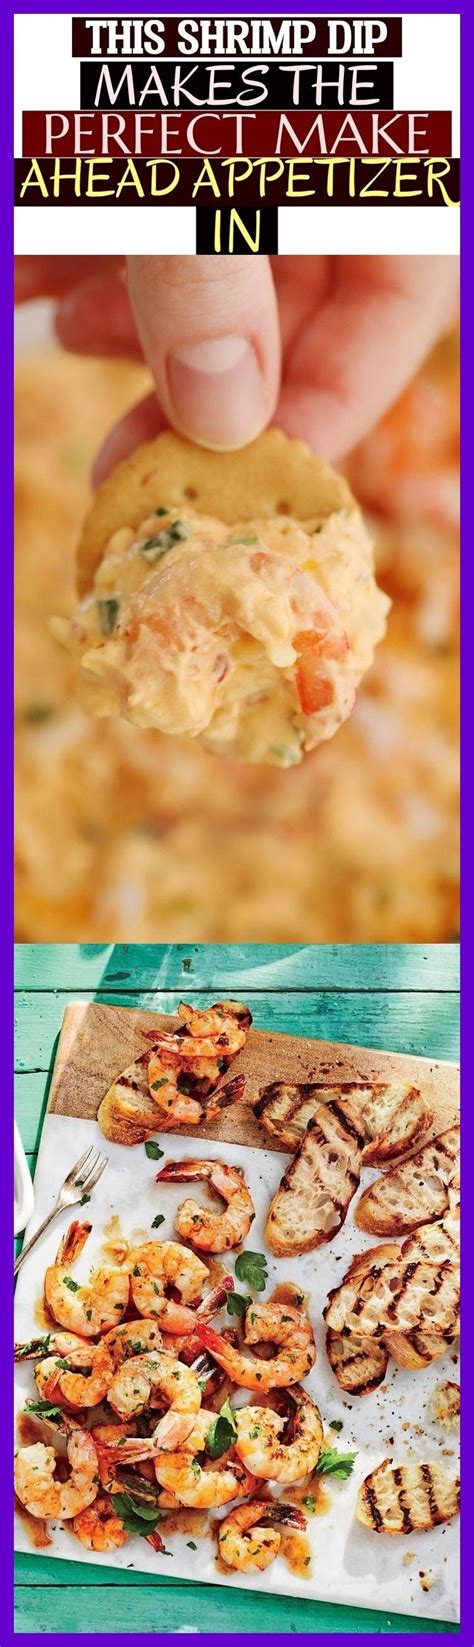 1 lb jumbo shrimp, peeled and deveined. This Shrimp Dip Makes The Perfect Make Ahead Appetizer In ~ #spendwithpennies #s..., #ahead # ...